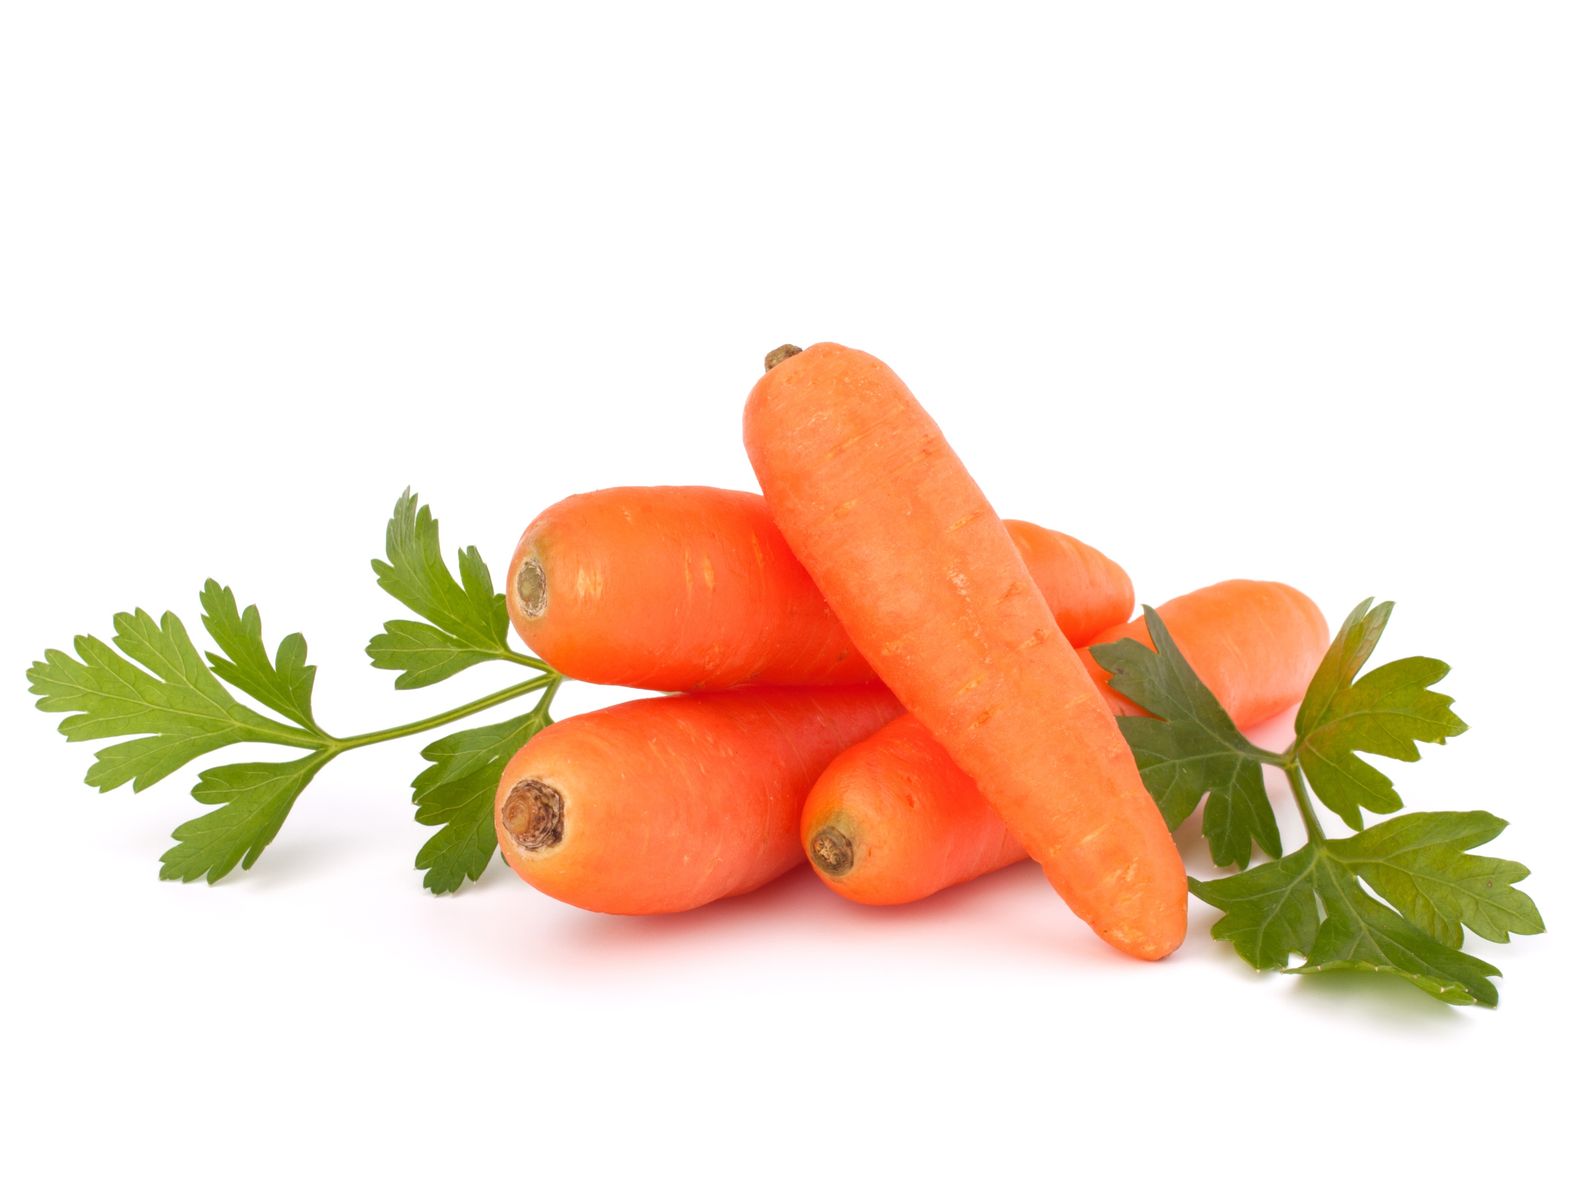 Amazing Carrot Pictures & Backgrounds